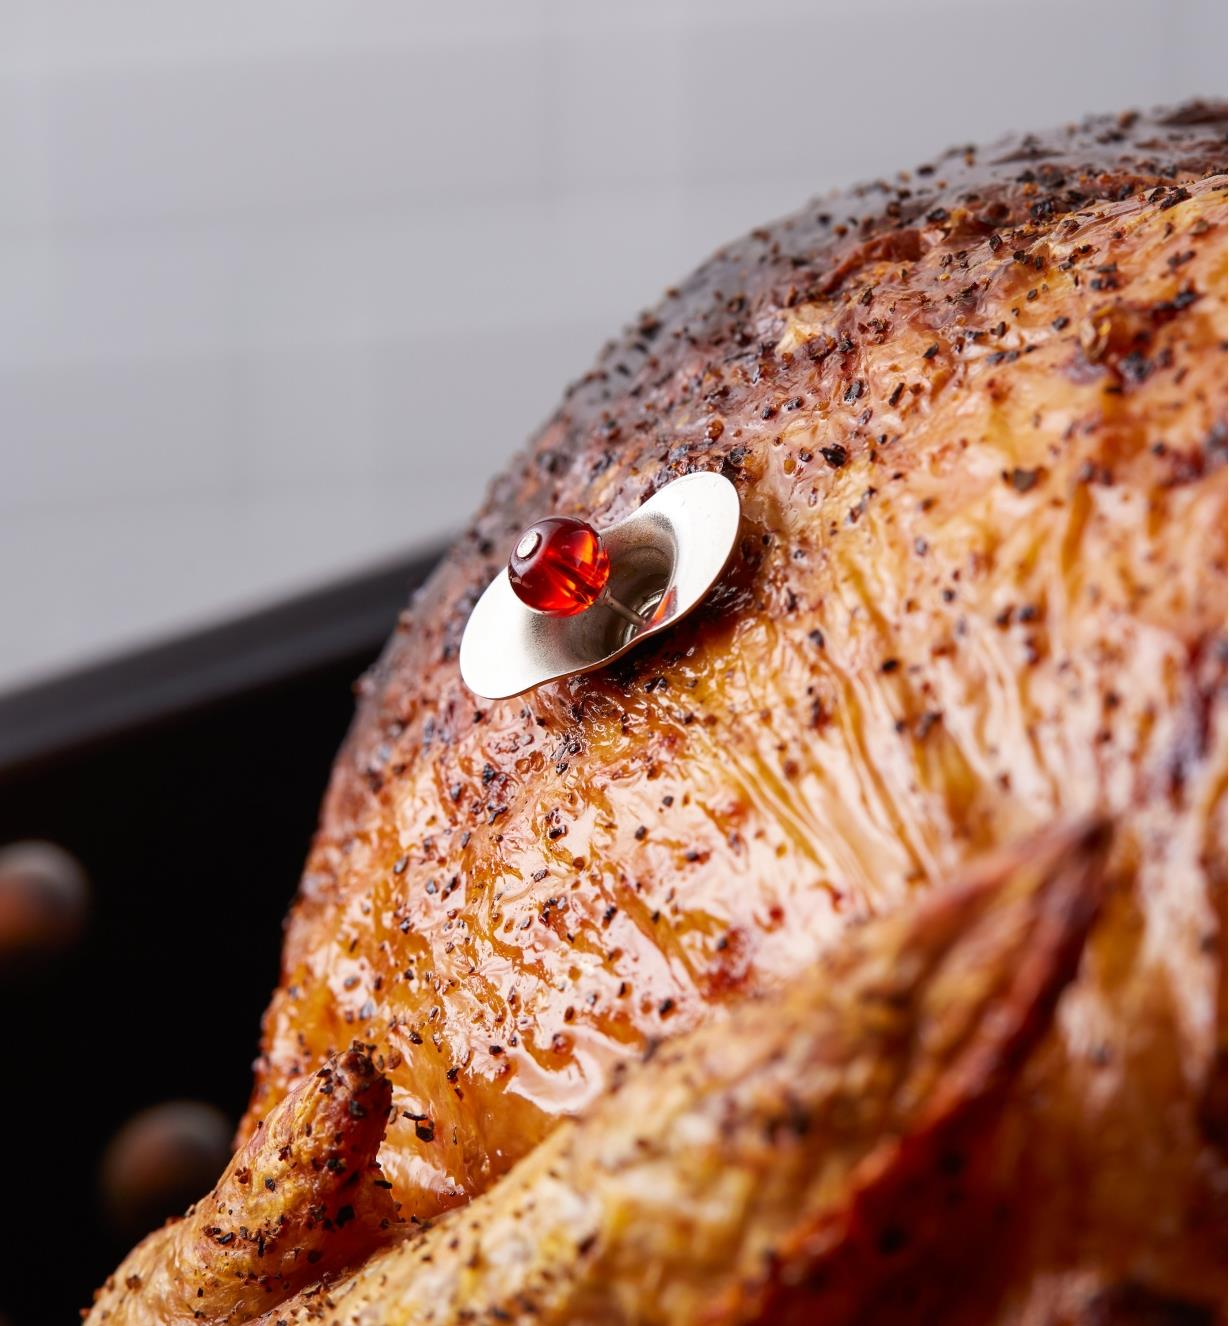 The indicator bead on the reusable pop-up turkey timer has popped up, indicating the turkey is fully cooked